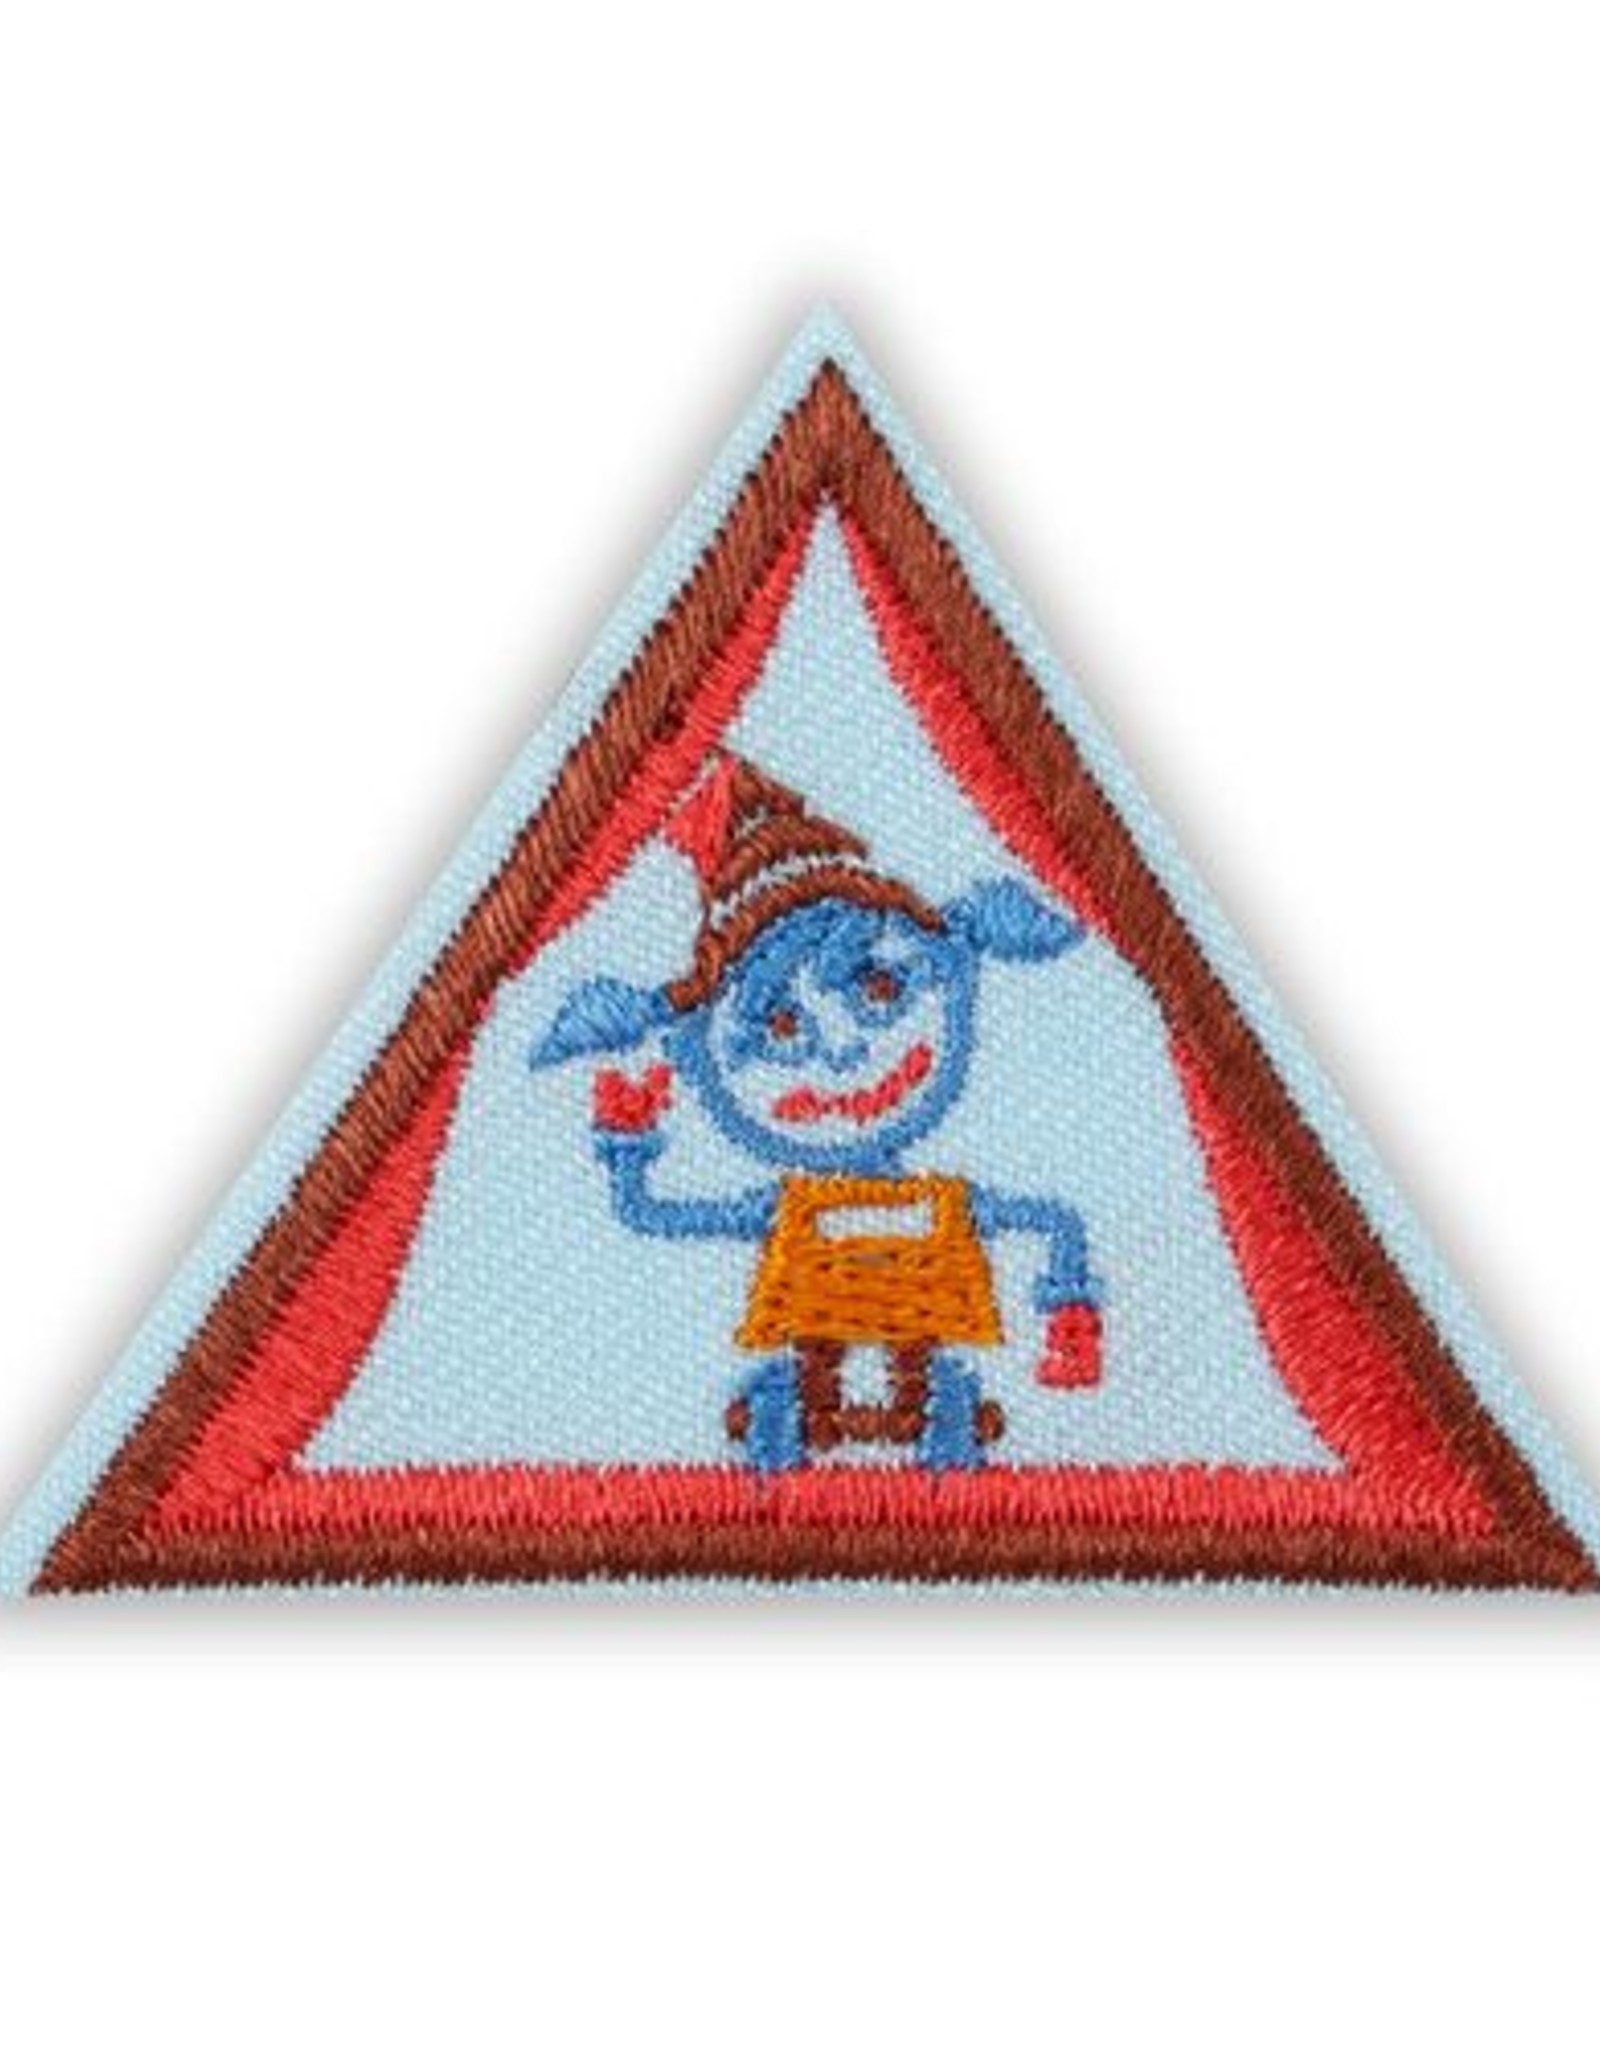 GIRL SCOUTS OF THE USA Brownie Showcasing Robots Badge